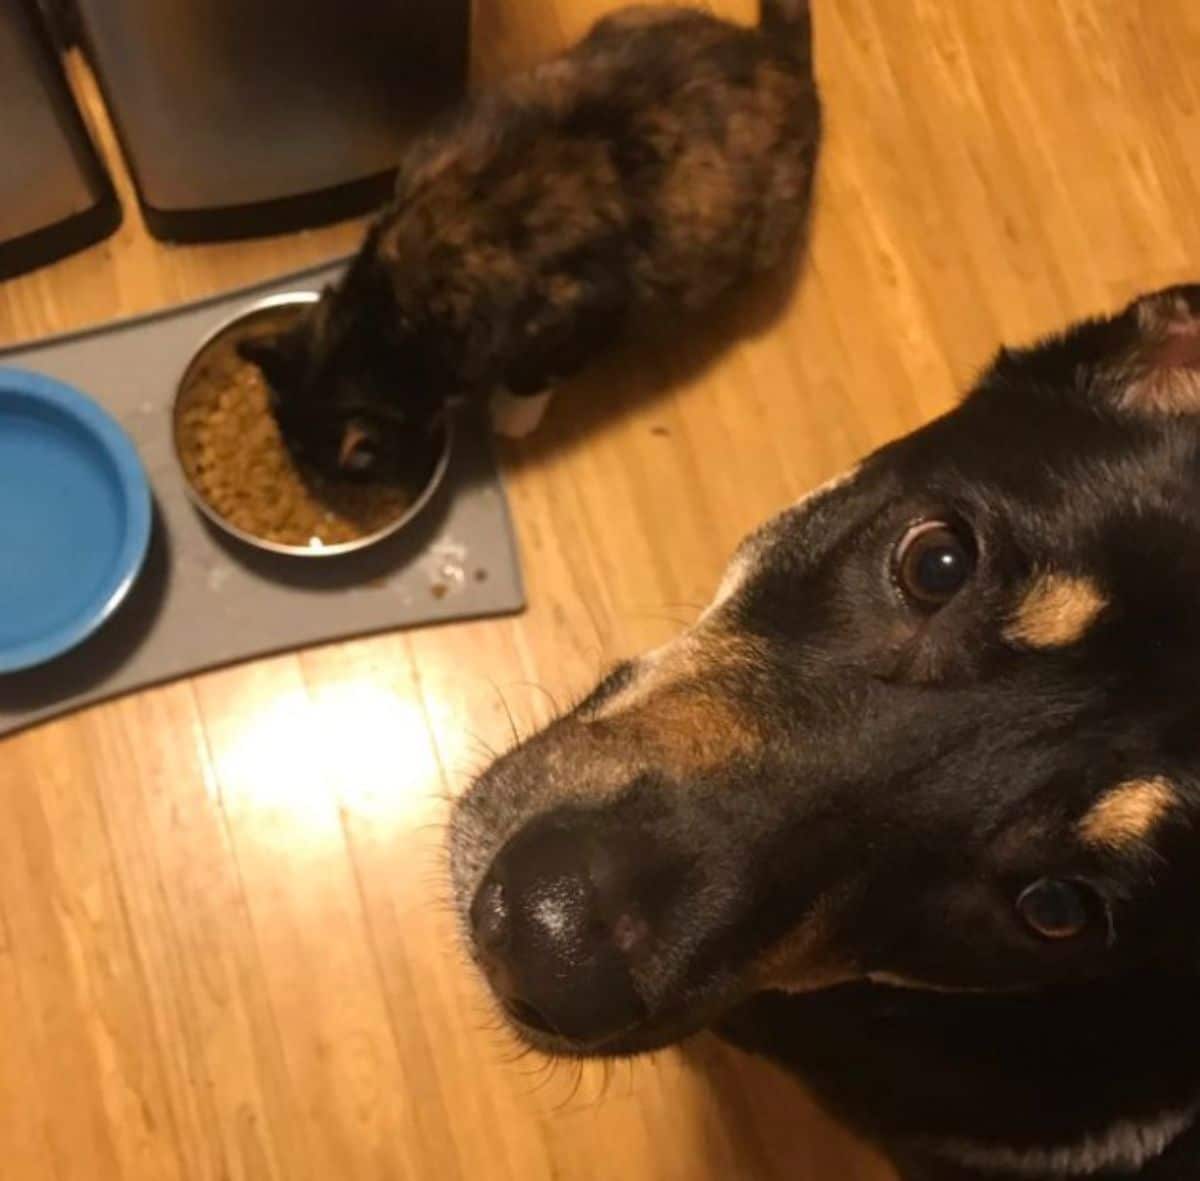 black and orange cat eating dog food and the back and brown dog looking up helplessly